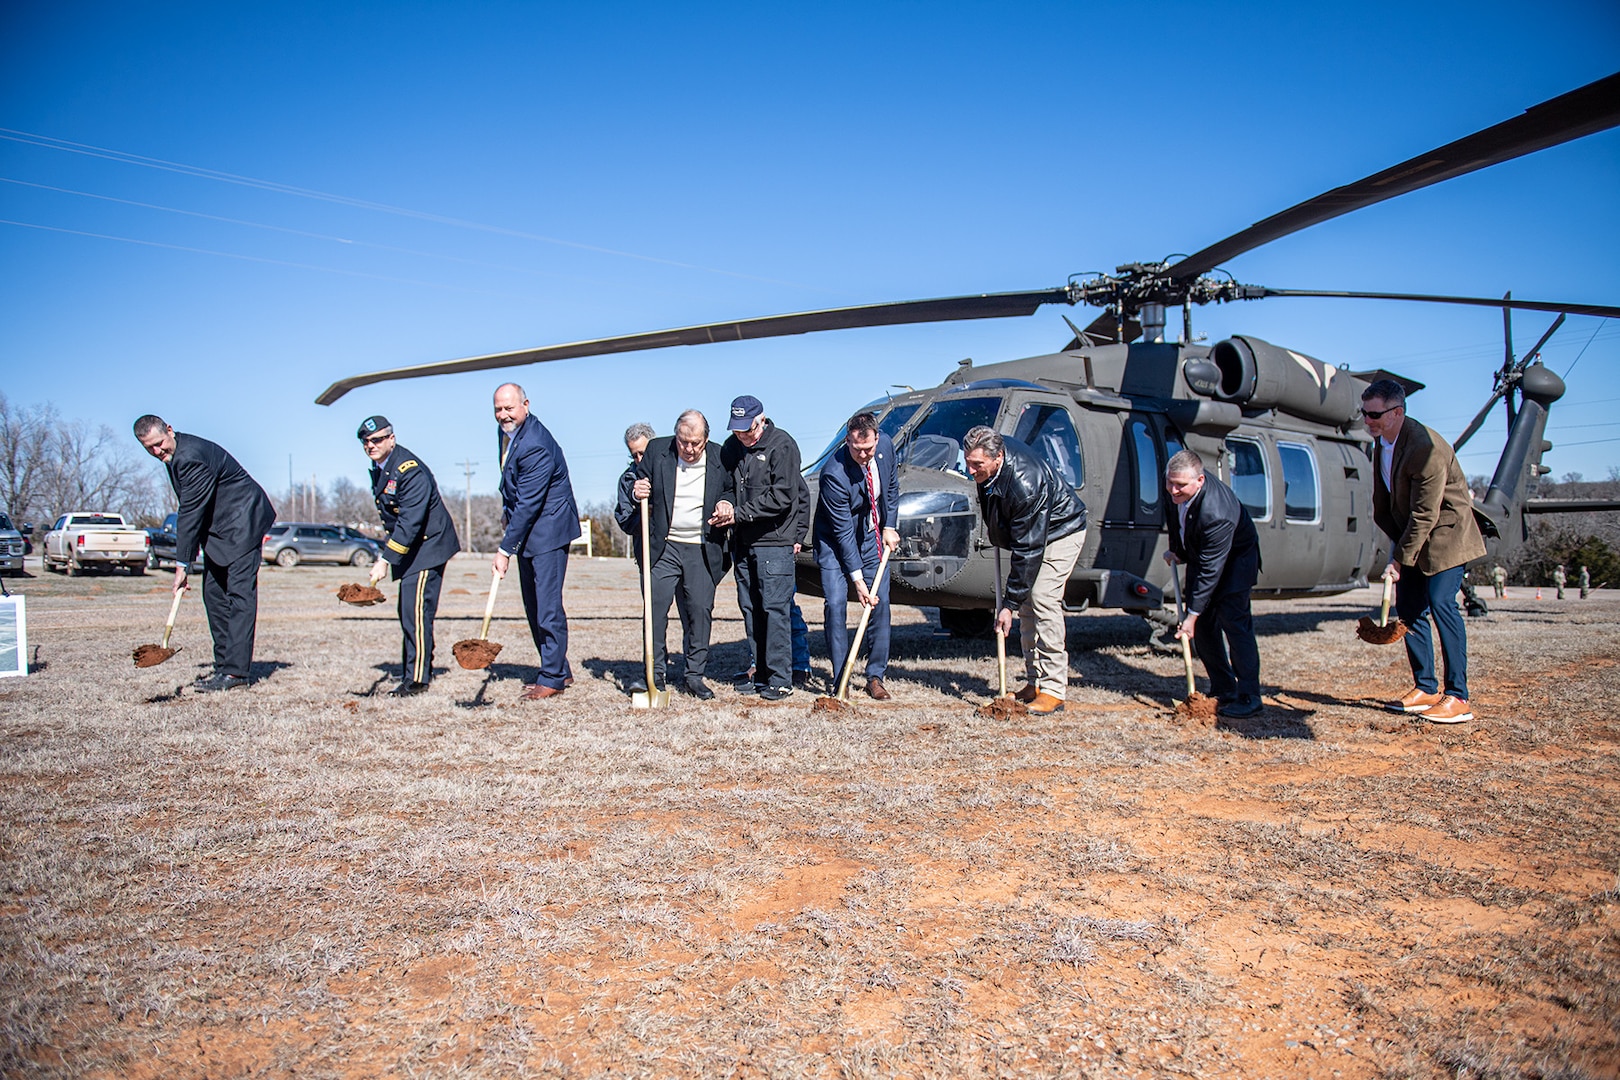 Oklahoma Governor Kevin Stitt (center), Representative Kevin Wallace (third from left), Maj. Gen. Thomas H. Mancino (second from left) and other state leaders break ground for the Oklahoma National Guard Joint Operations Center in Chandler, Oklahoma, Feb. 17, 2023. (Oklahoma National Guard photo by Anthony Jones)